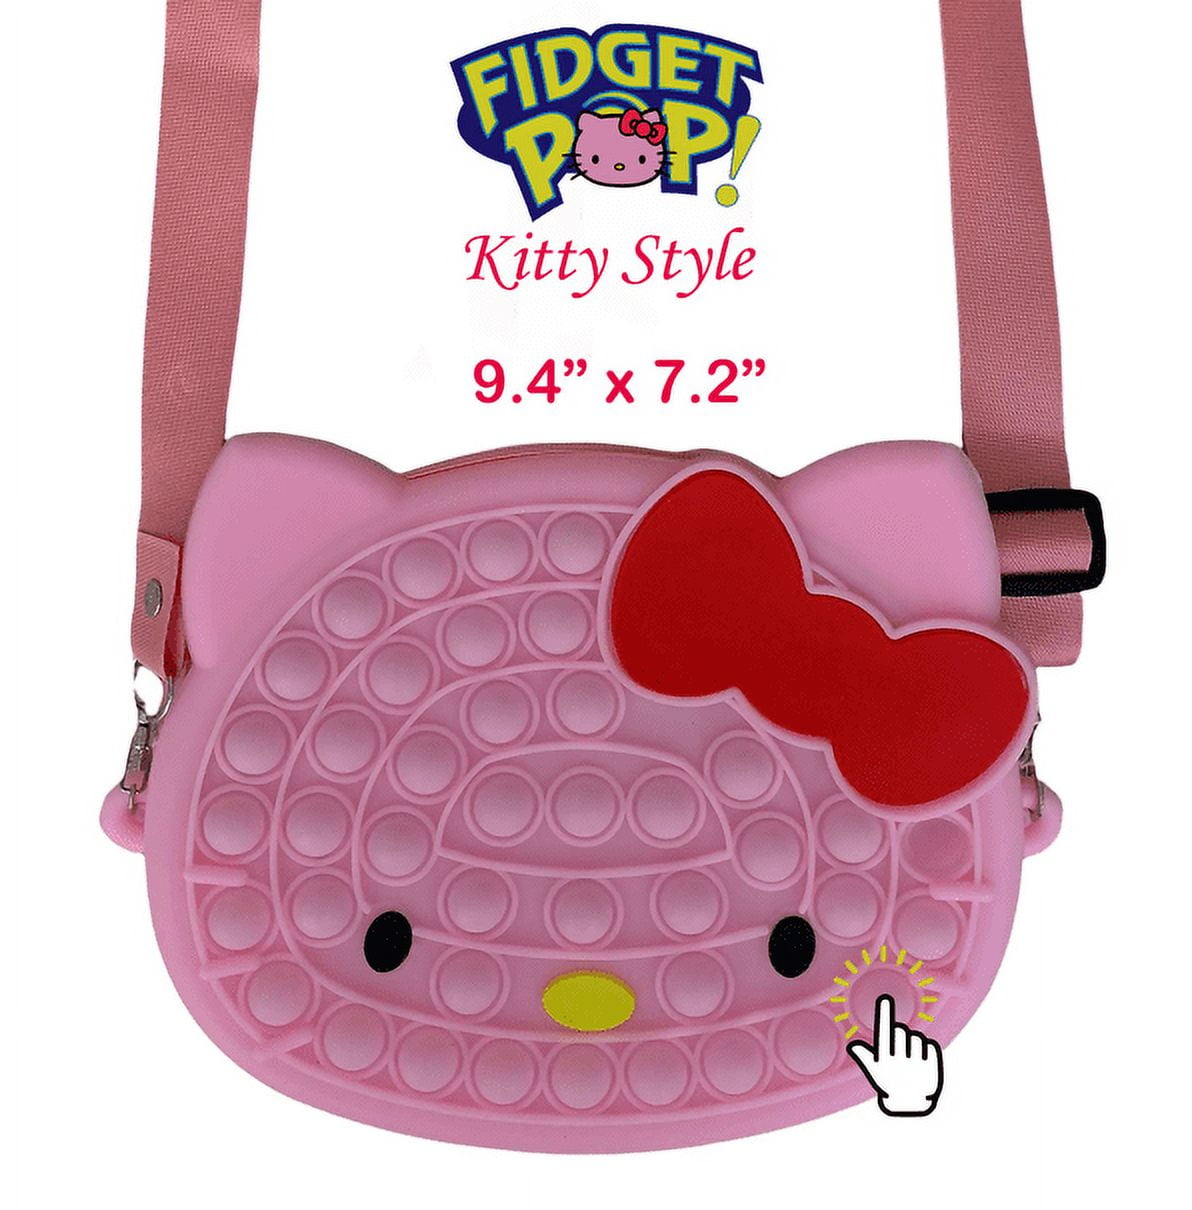 Hello Kitty Style Fidget PopIt Bubble Stress Reliever Shoulder Bag/Purse/Toy  for Girls, Teens, and Women (PINK) 